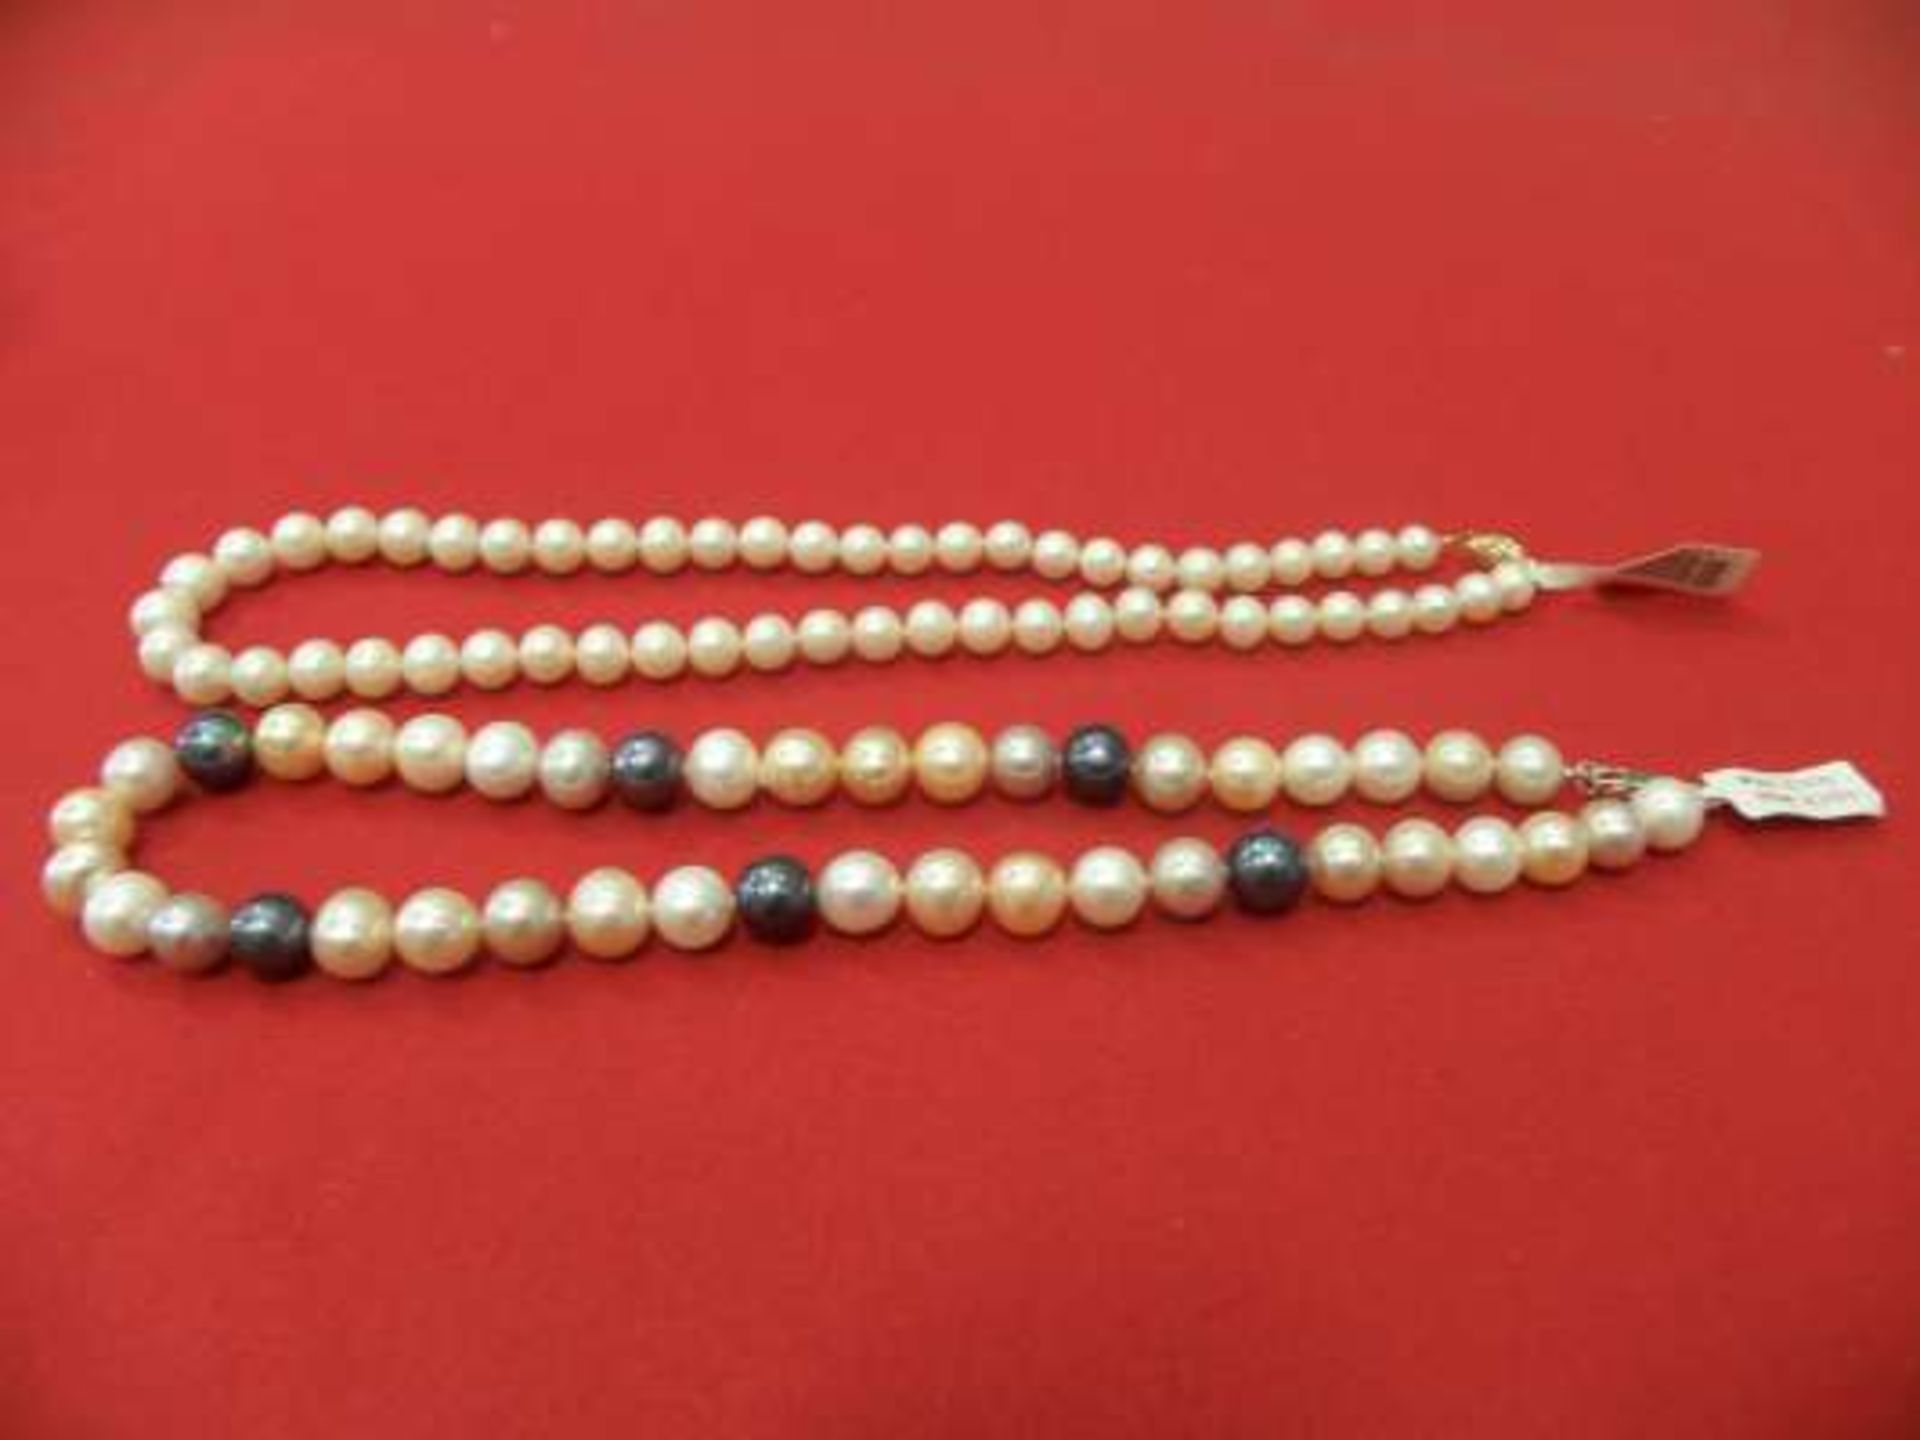 1 X 18" WHITE FRESH WATER PEARL NECKLACE RRP £140, 1 X 18" MIXED COLOUR FRESH WATER PEARL NECKLACE